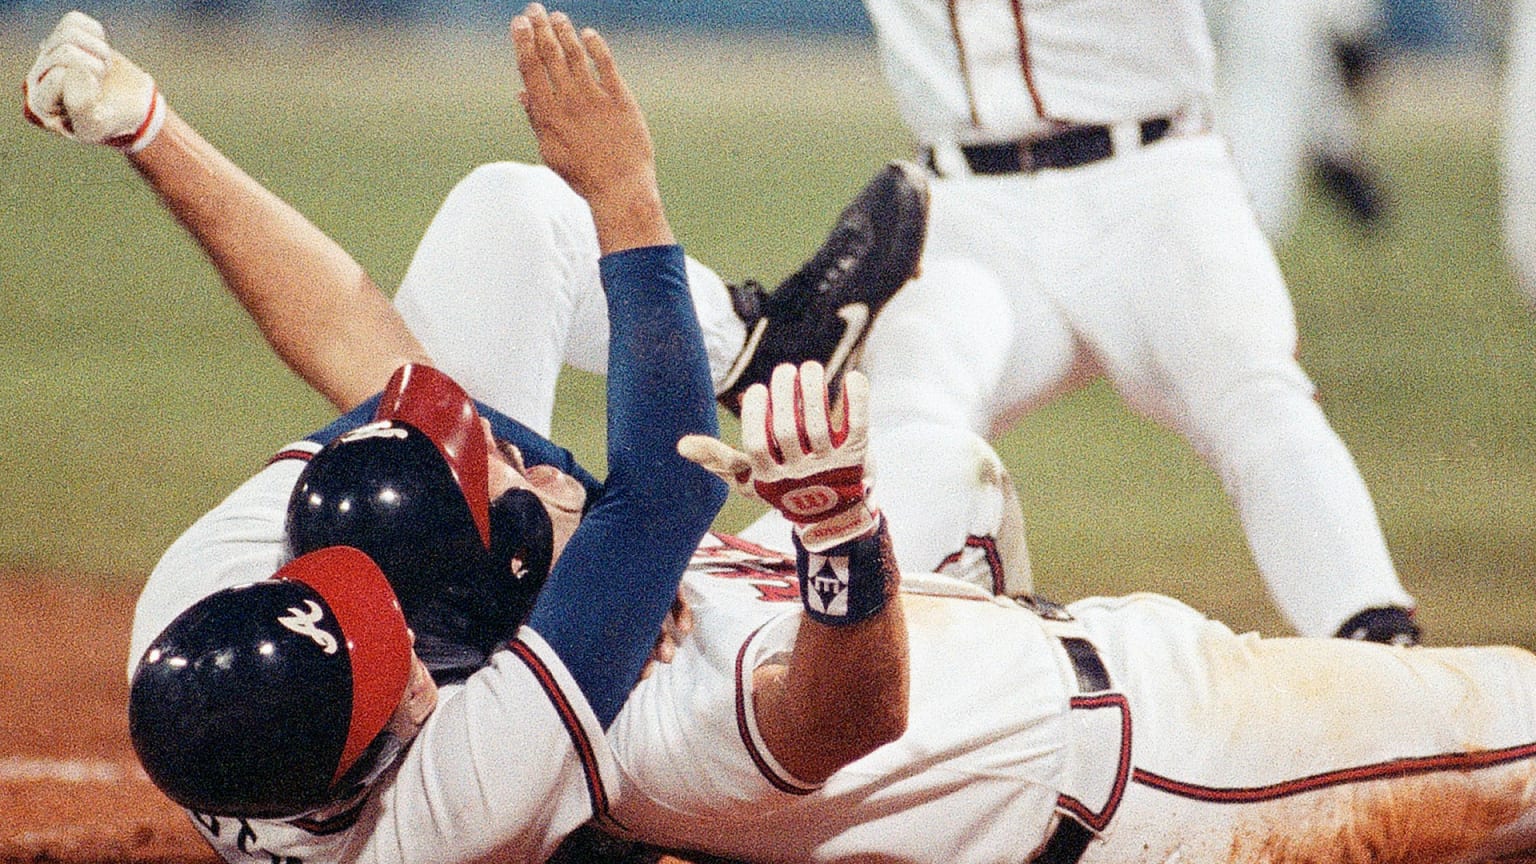 Braves players celebrate after winning the 1992 NLCS